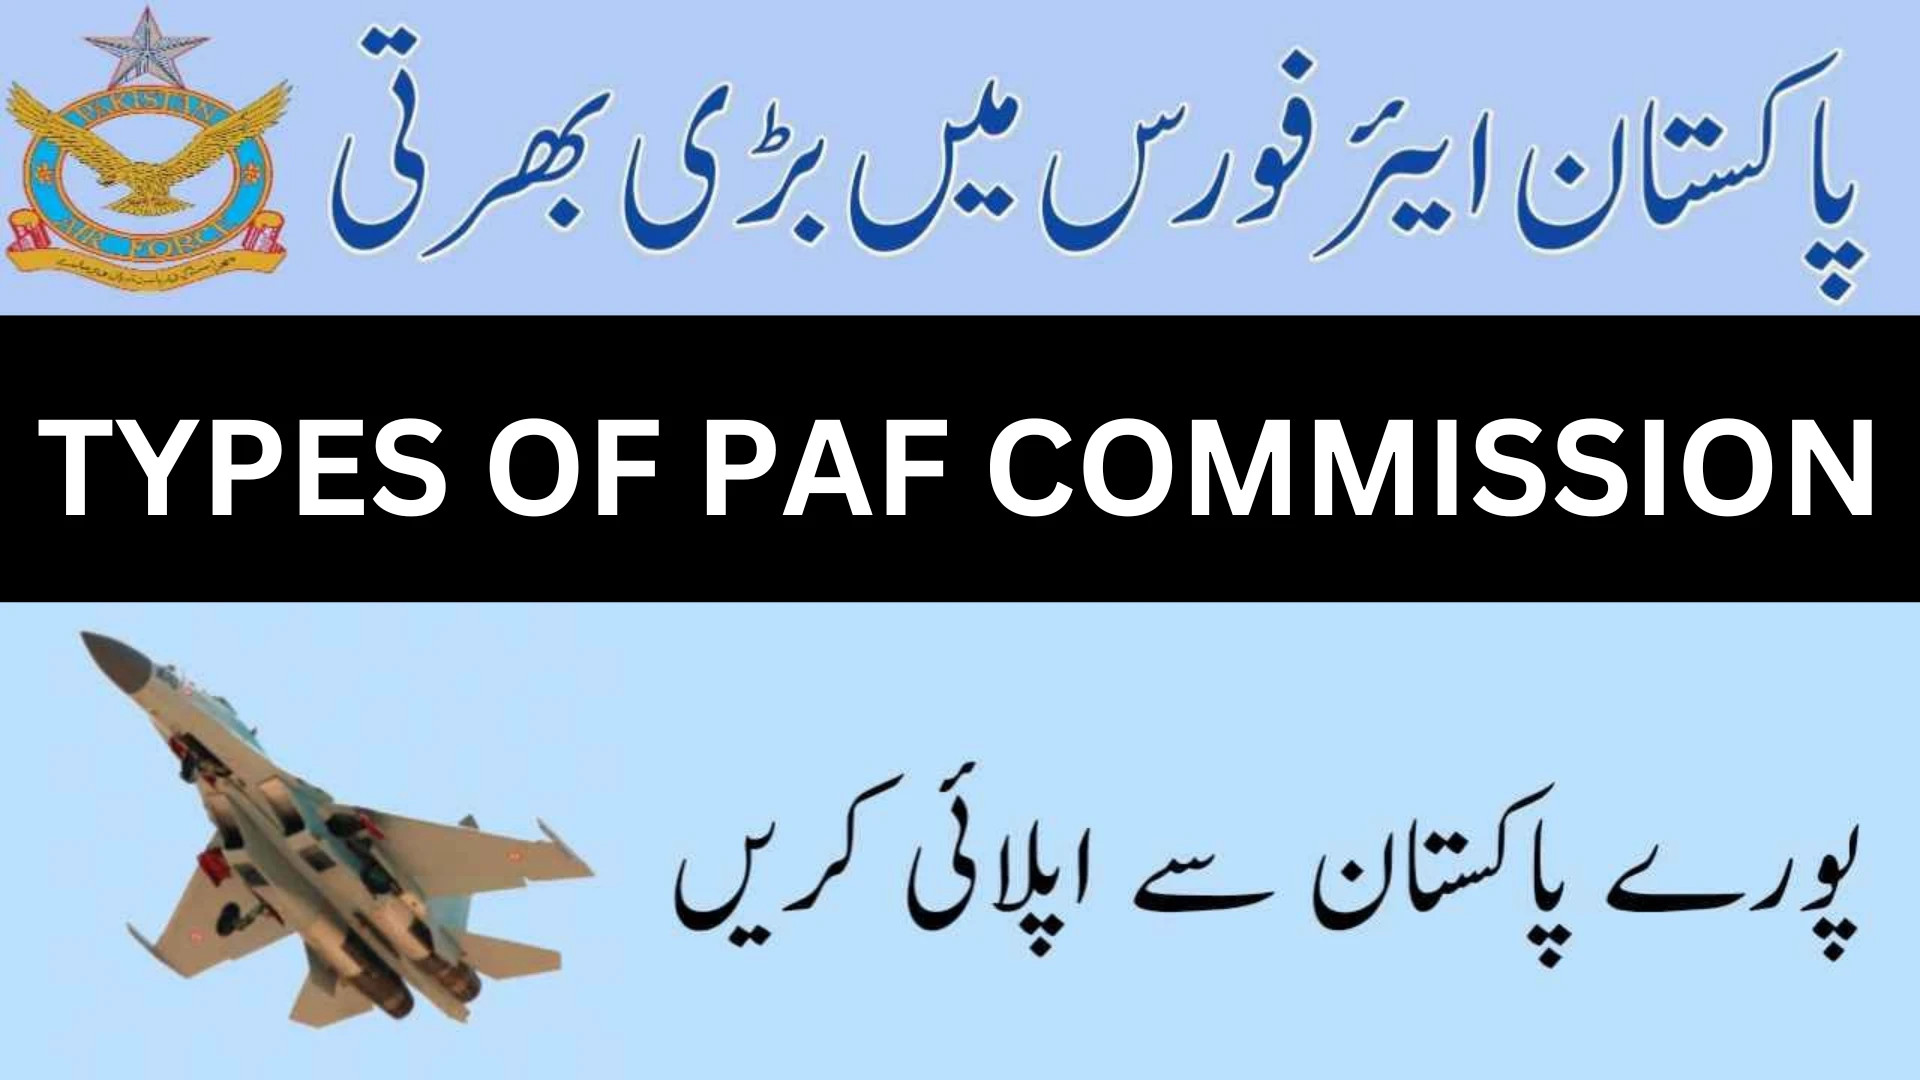 Types of PAF commission